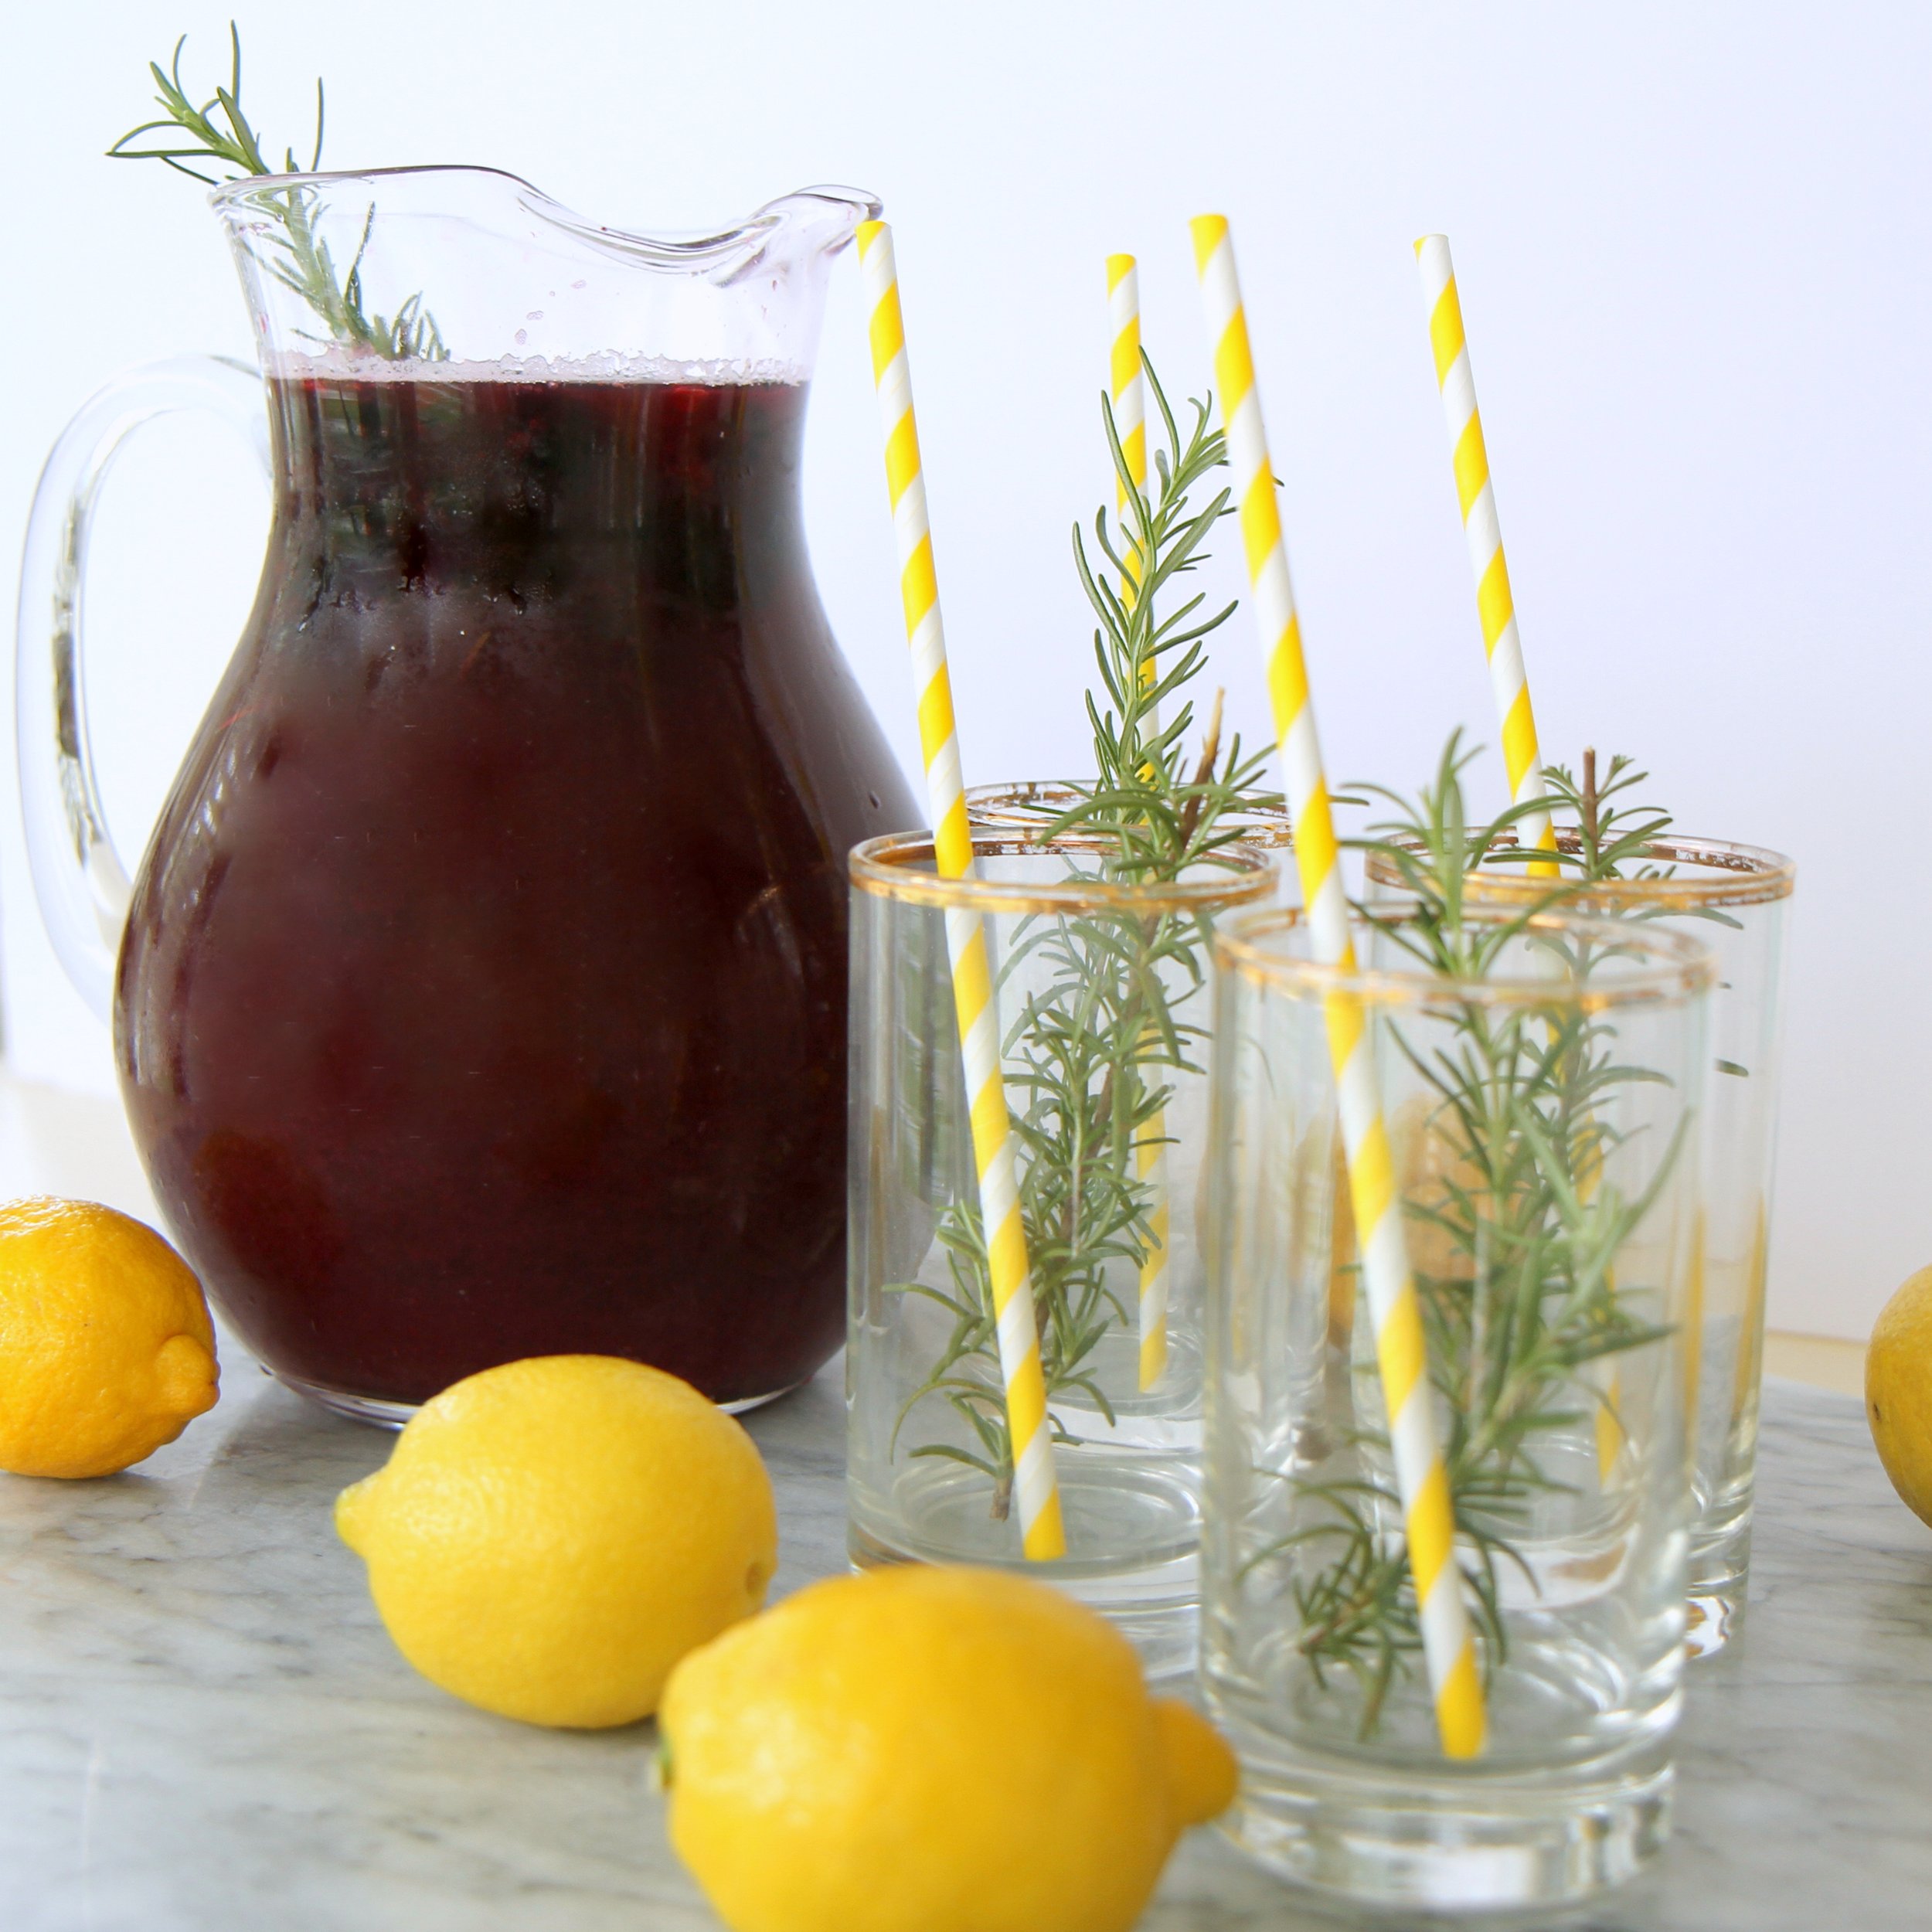 sparkling blackberry rosemary lemonade recipe (the perfect addition to brunch, or to dinner on the patio!)